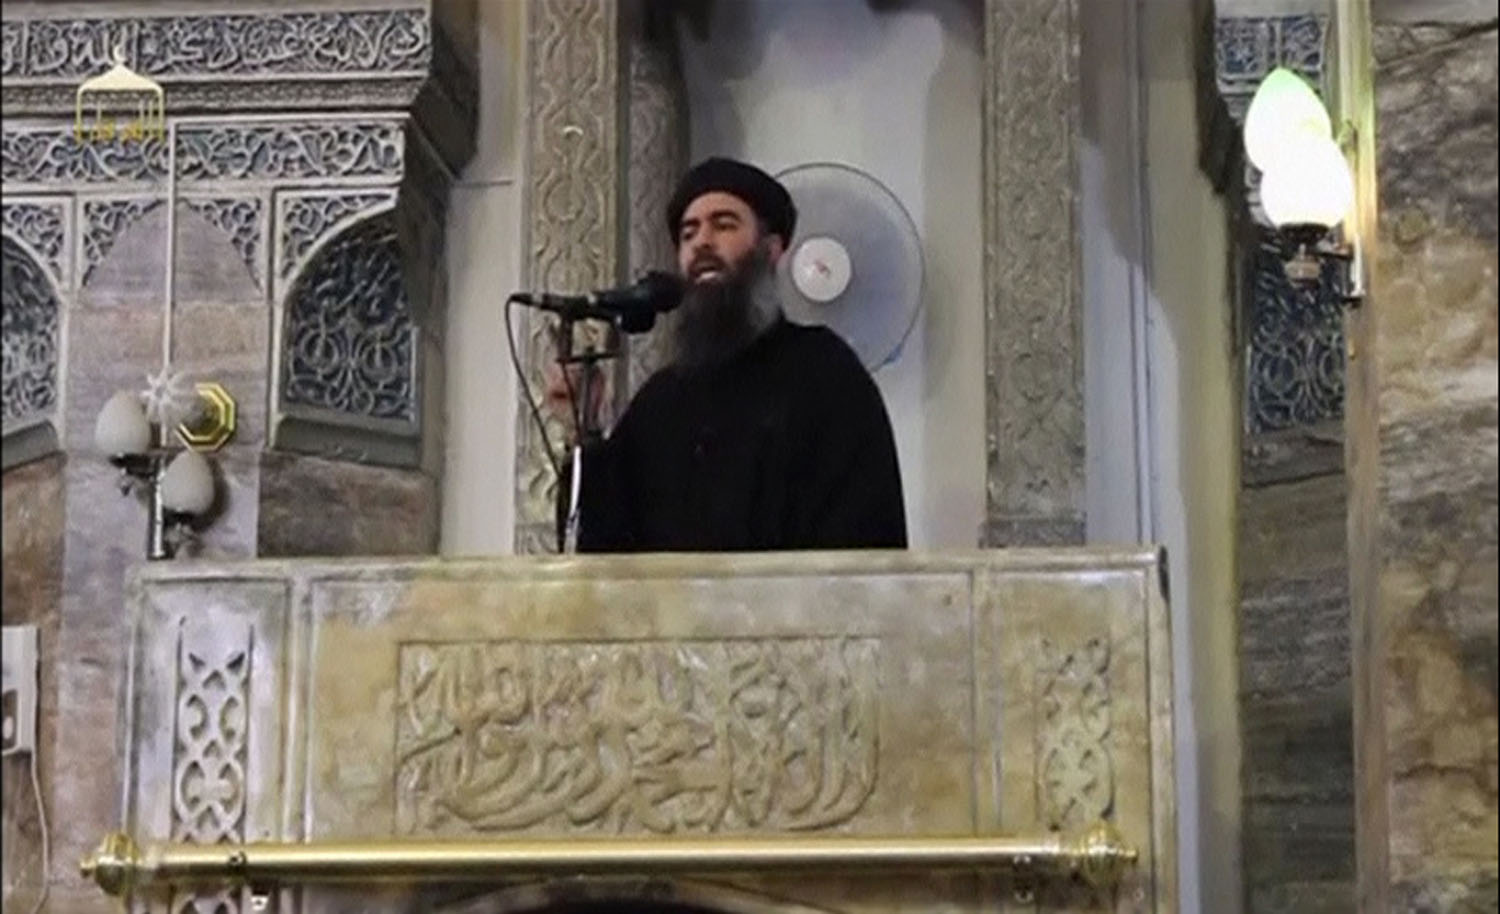 A man purported to be the reclusive ISIS leader Abu Bakr al-Baghdadi. (Reuters)